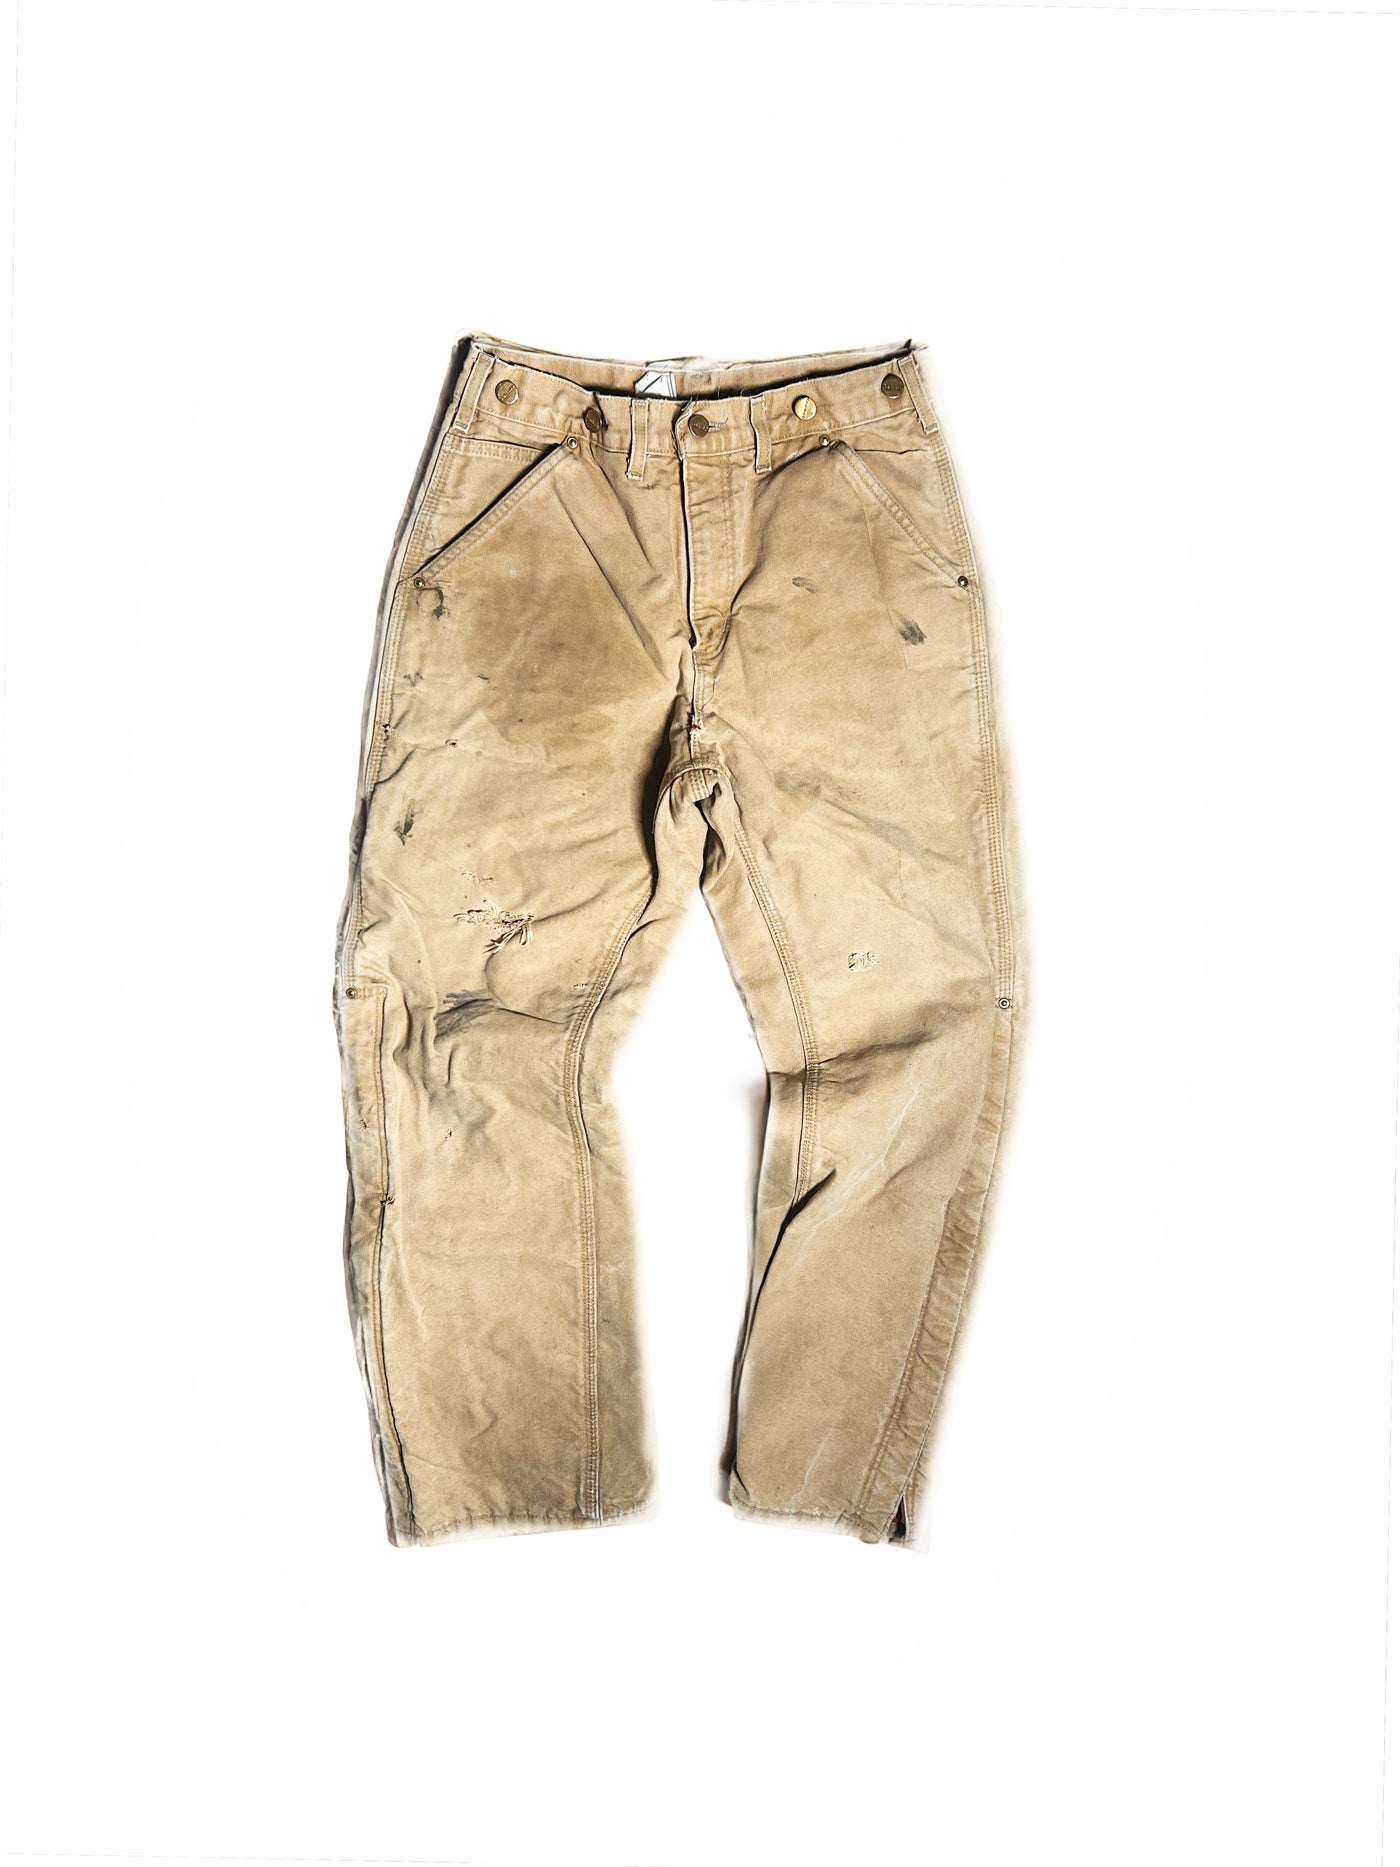 Vintage 90s Lined Carhartt Fire Resistant Pants